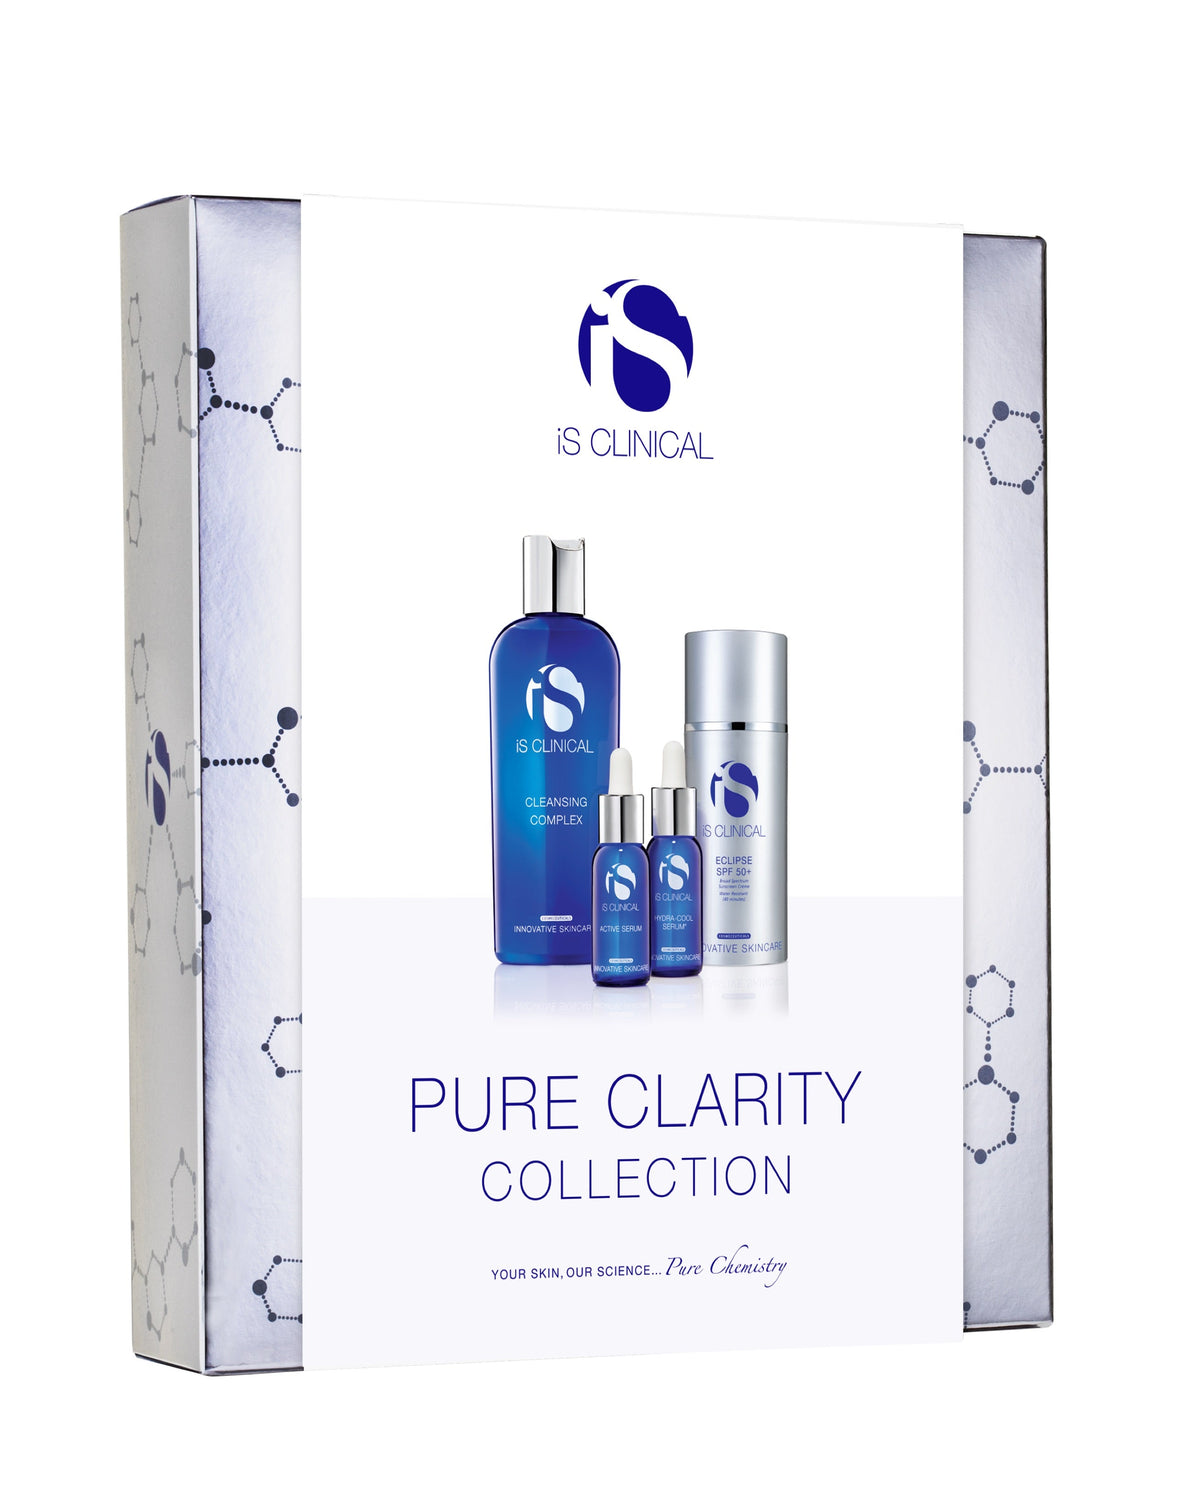 iS Clinical Pure Clarity Collection 180ml, 15ml, 15ml, 100g